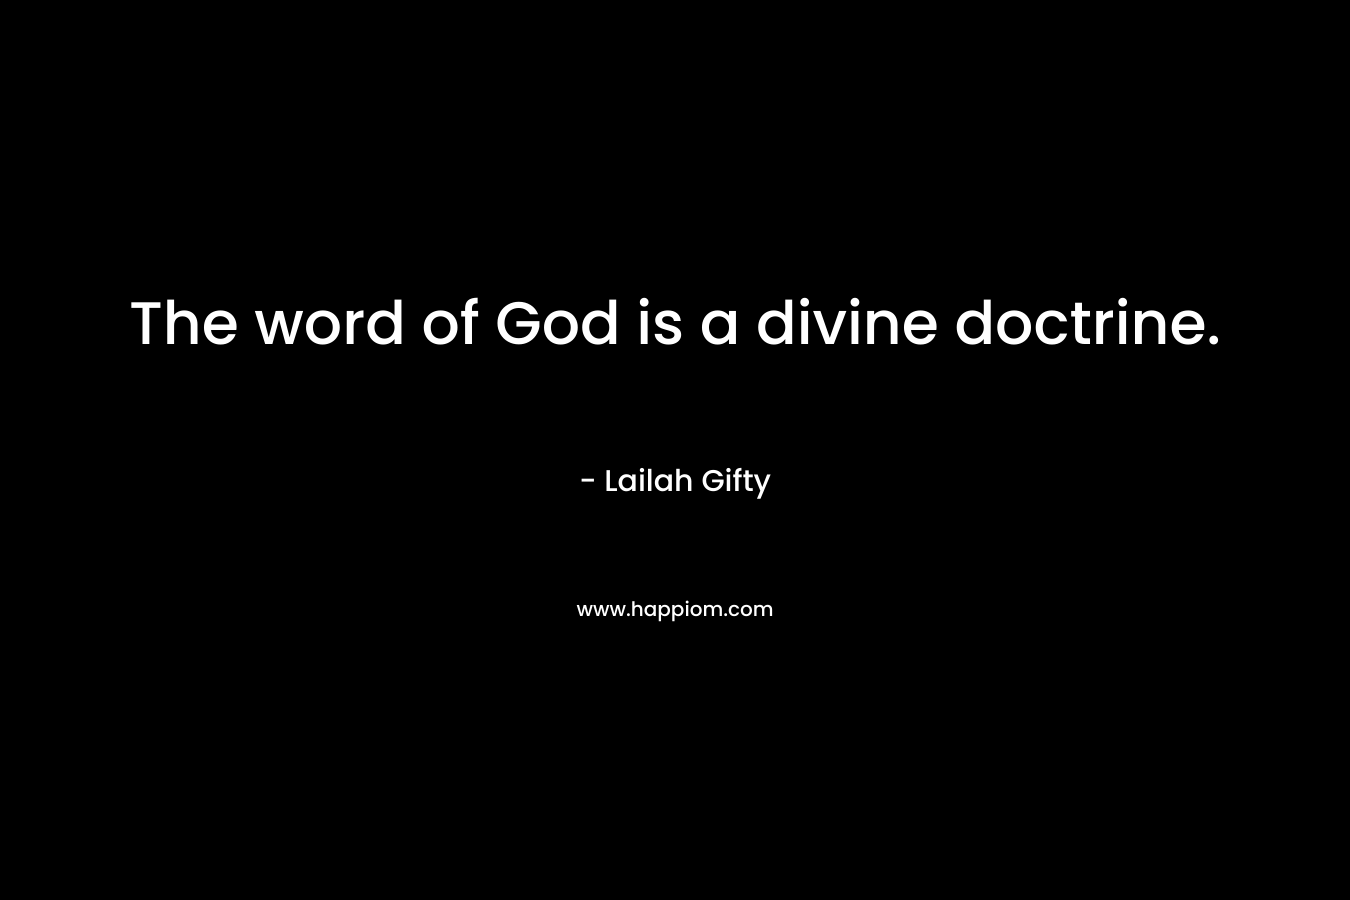 The word of God is a divine doctrine. – Lailah Gifty